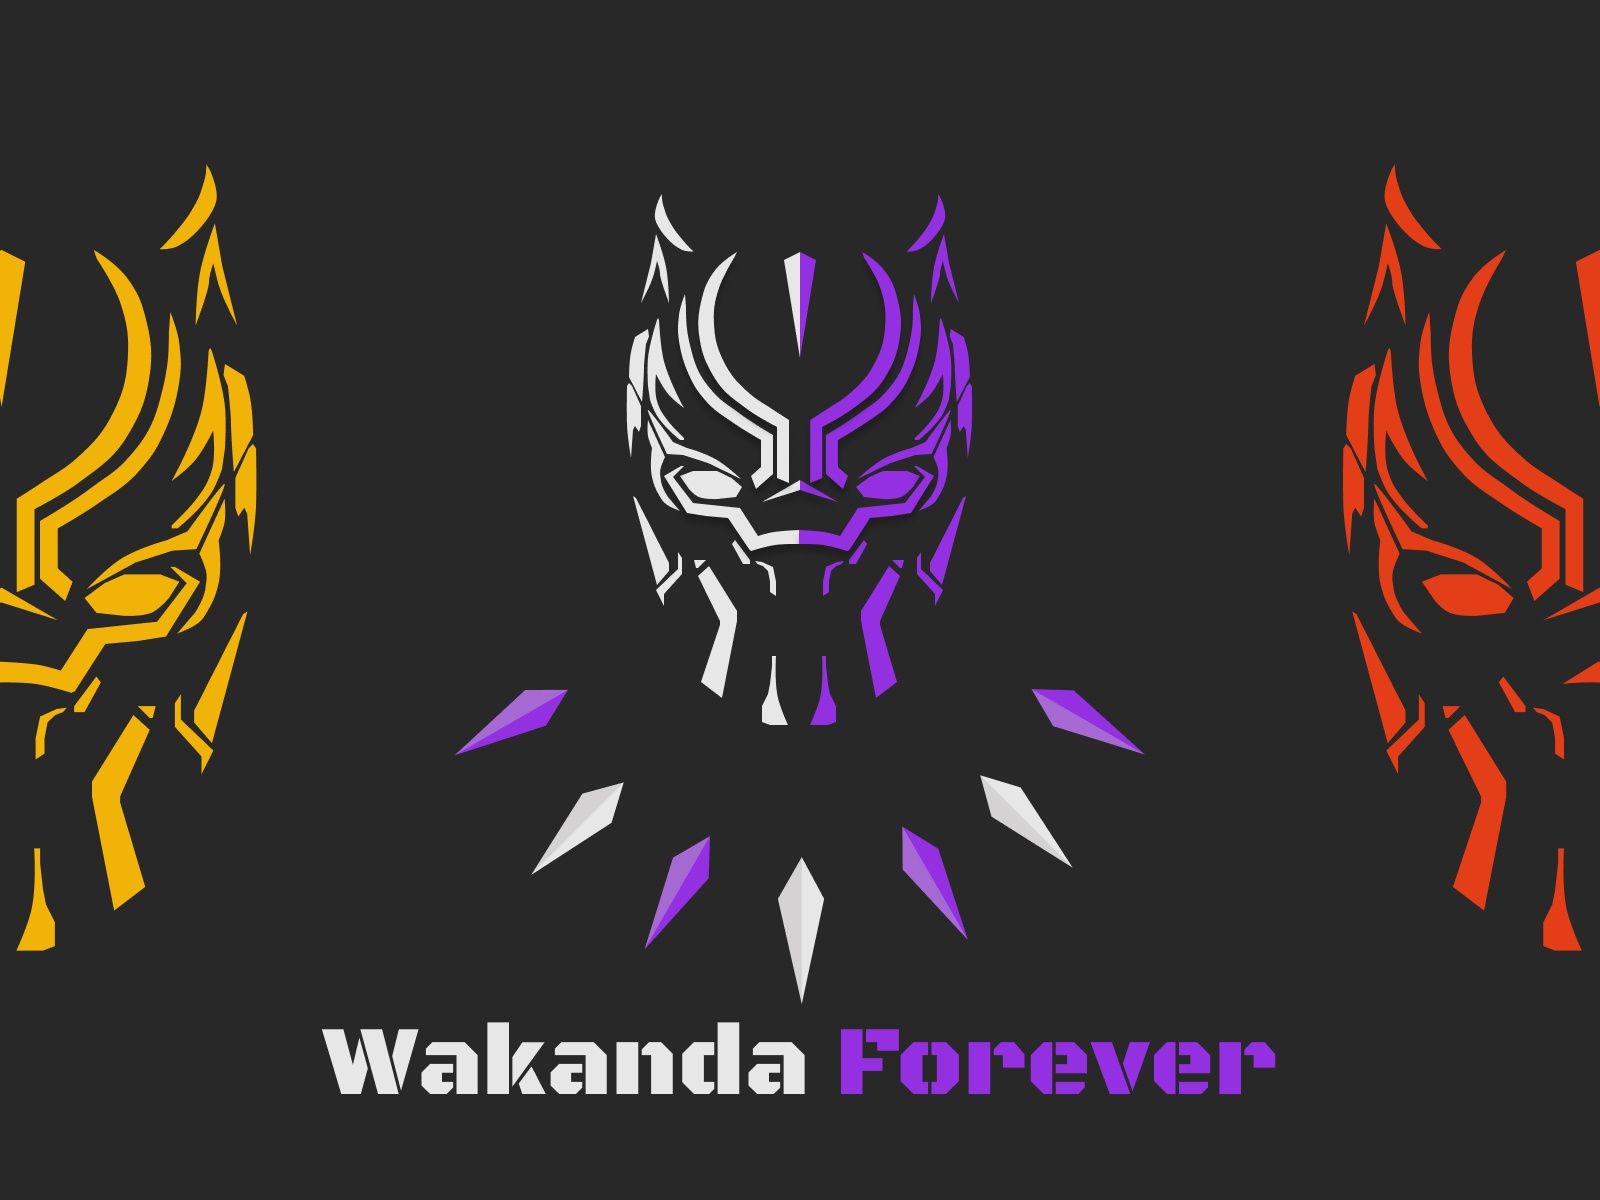 Black Panther: Wakanda Forever free instals